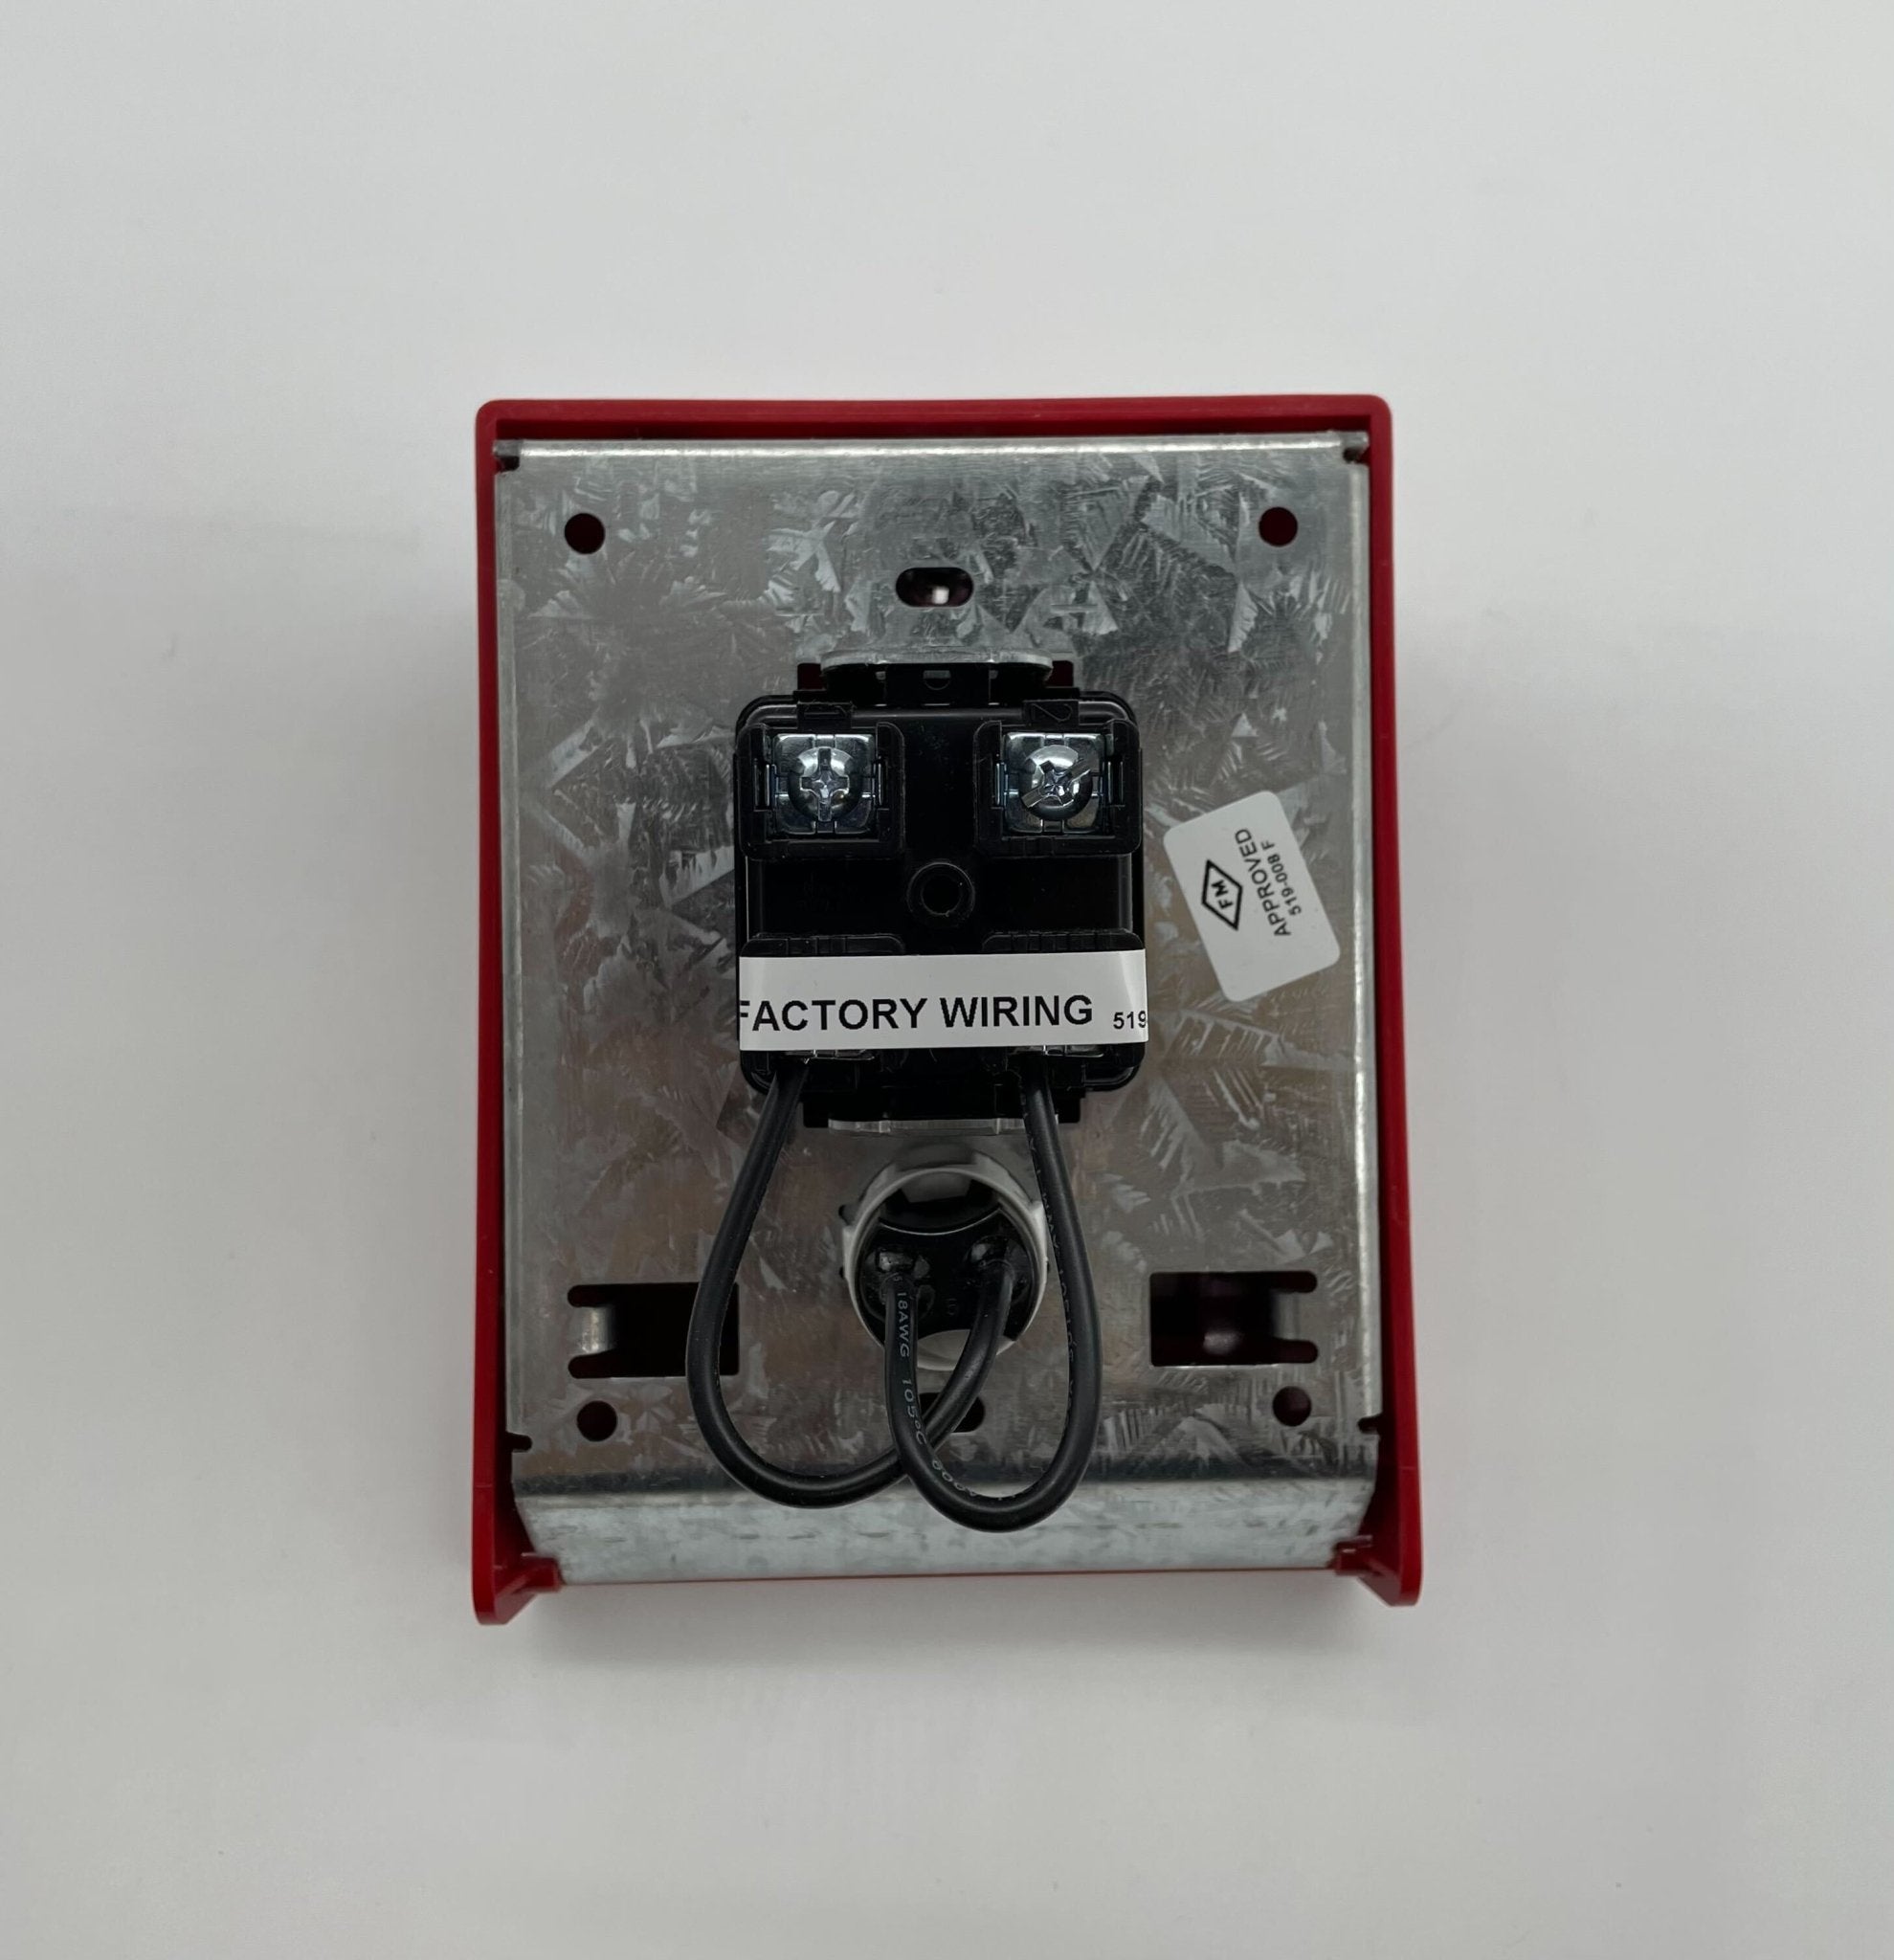 Simplex 4099-9021 No Grip Manual Station - The Fire Alarm Supplier